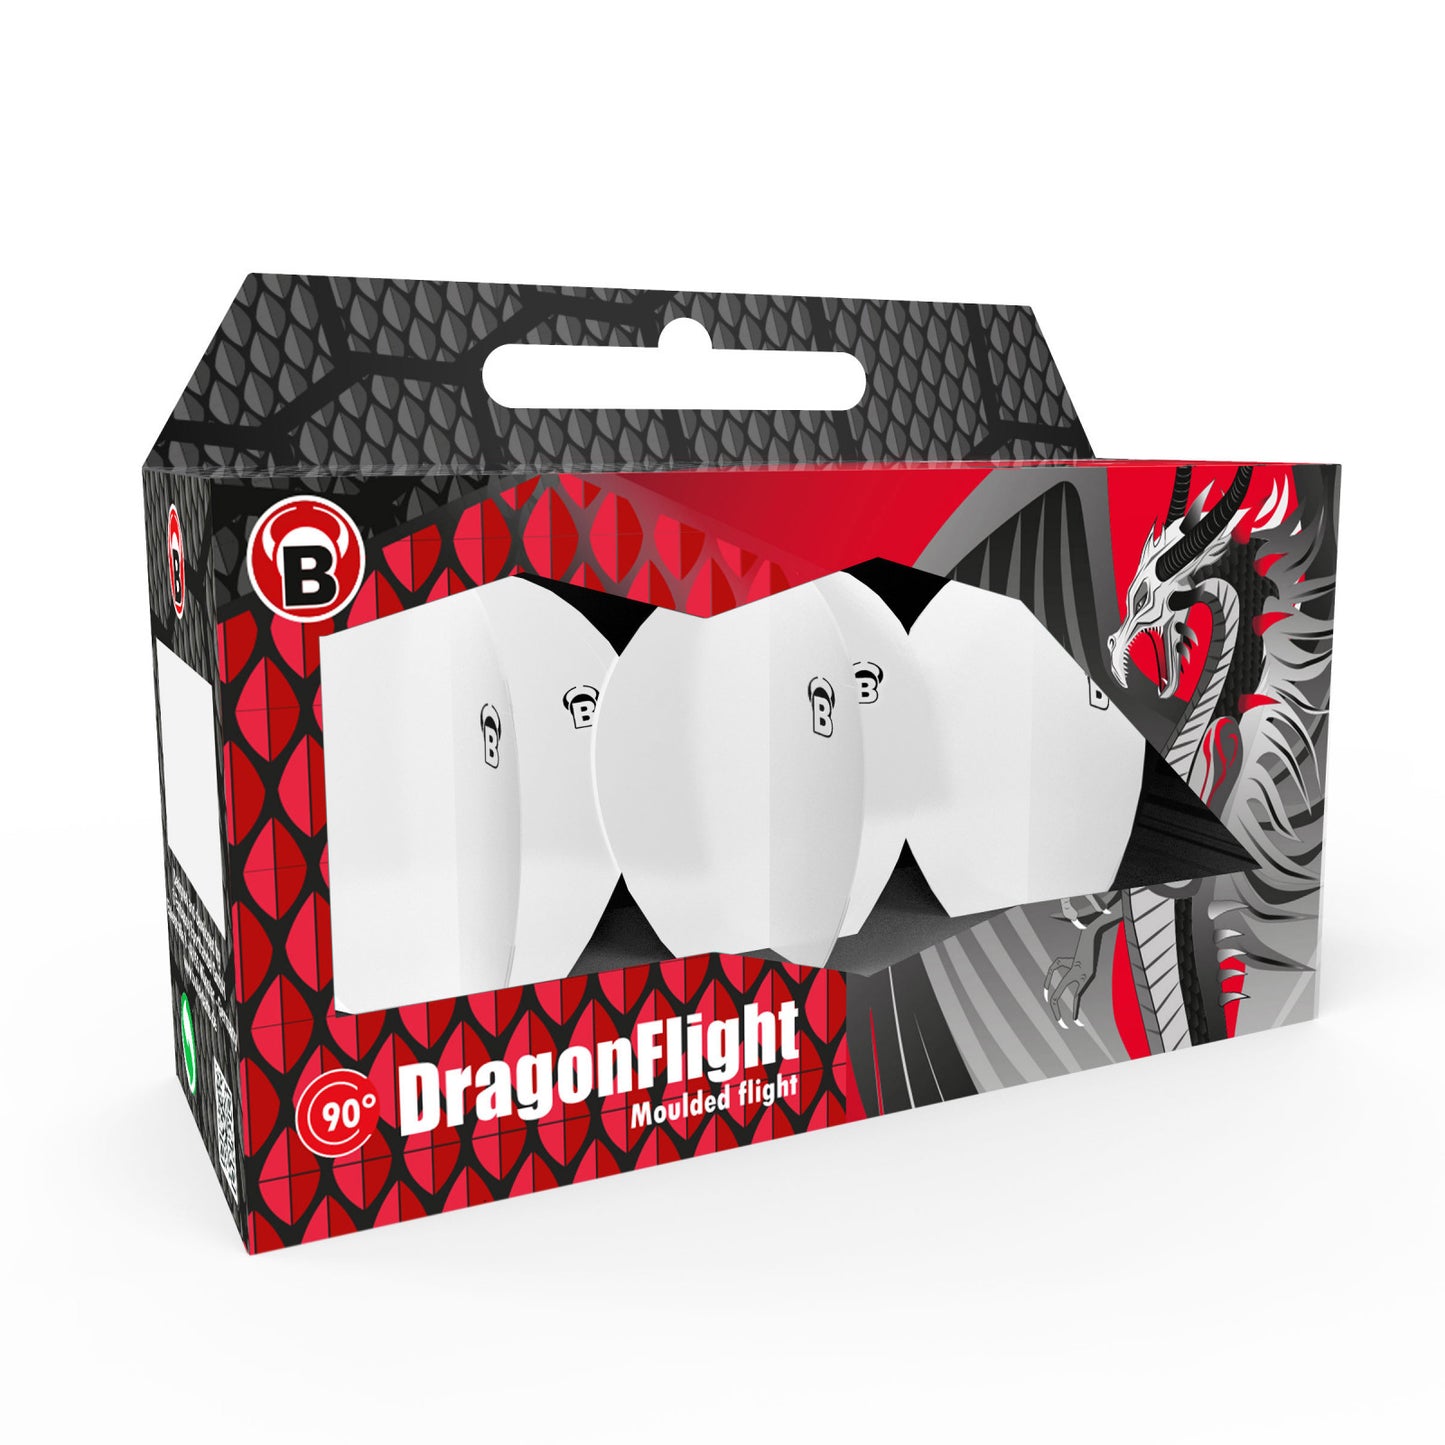 BULL'S DragonFlights - PEAR - 200 MICRONS - EXTRA STRONG FLIGHTS